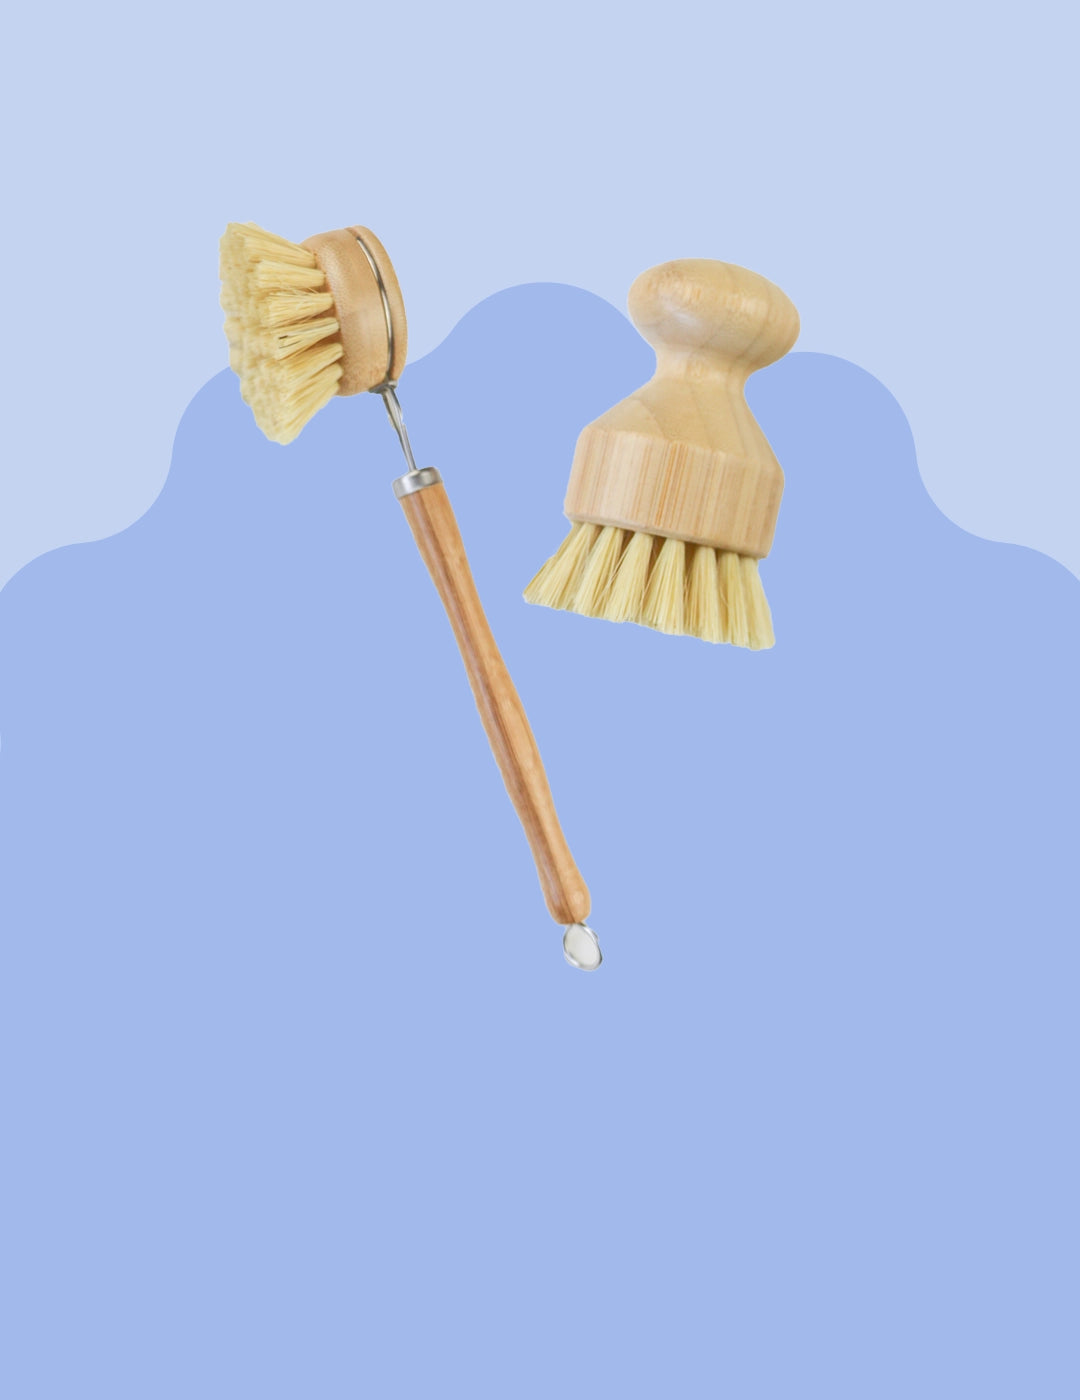 Two durable scrubrushes made fro eco friendly bamboo material being held over top of a sudsy sink. One scrub brush has a long handle and replaceable head and the other is a short scrub brush with ergonomic handle.